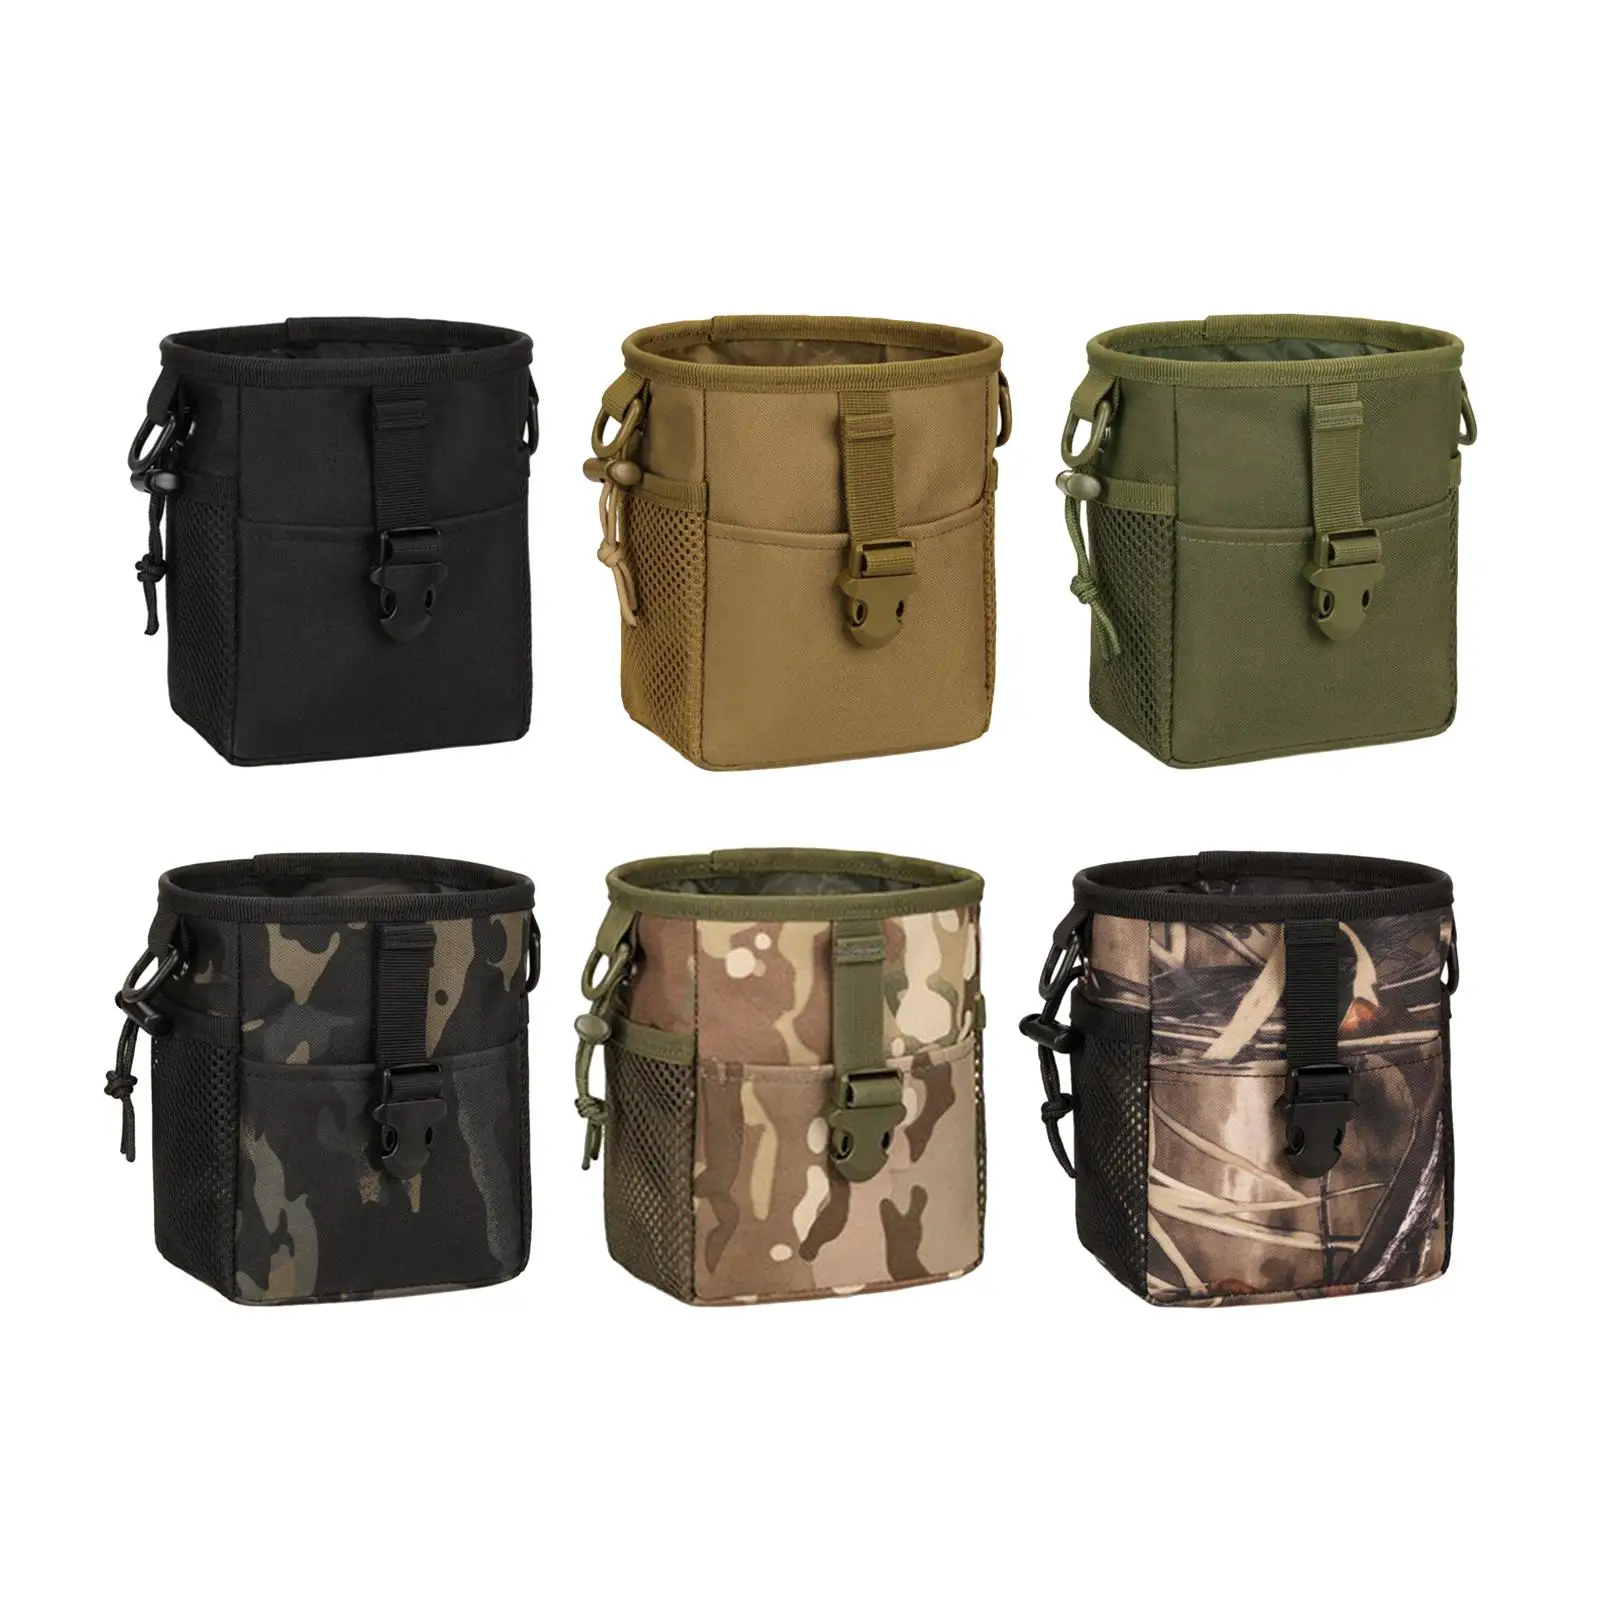 Pouch Bag Multipurpose Fittings Pack Waist Bag for Phone Camping Tool Hunting Hiking